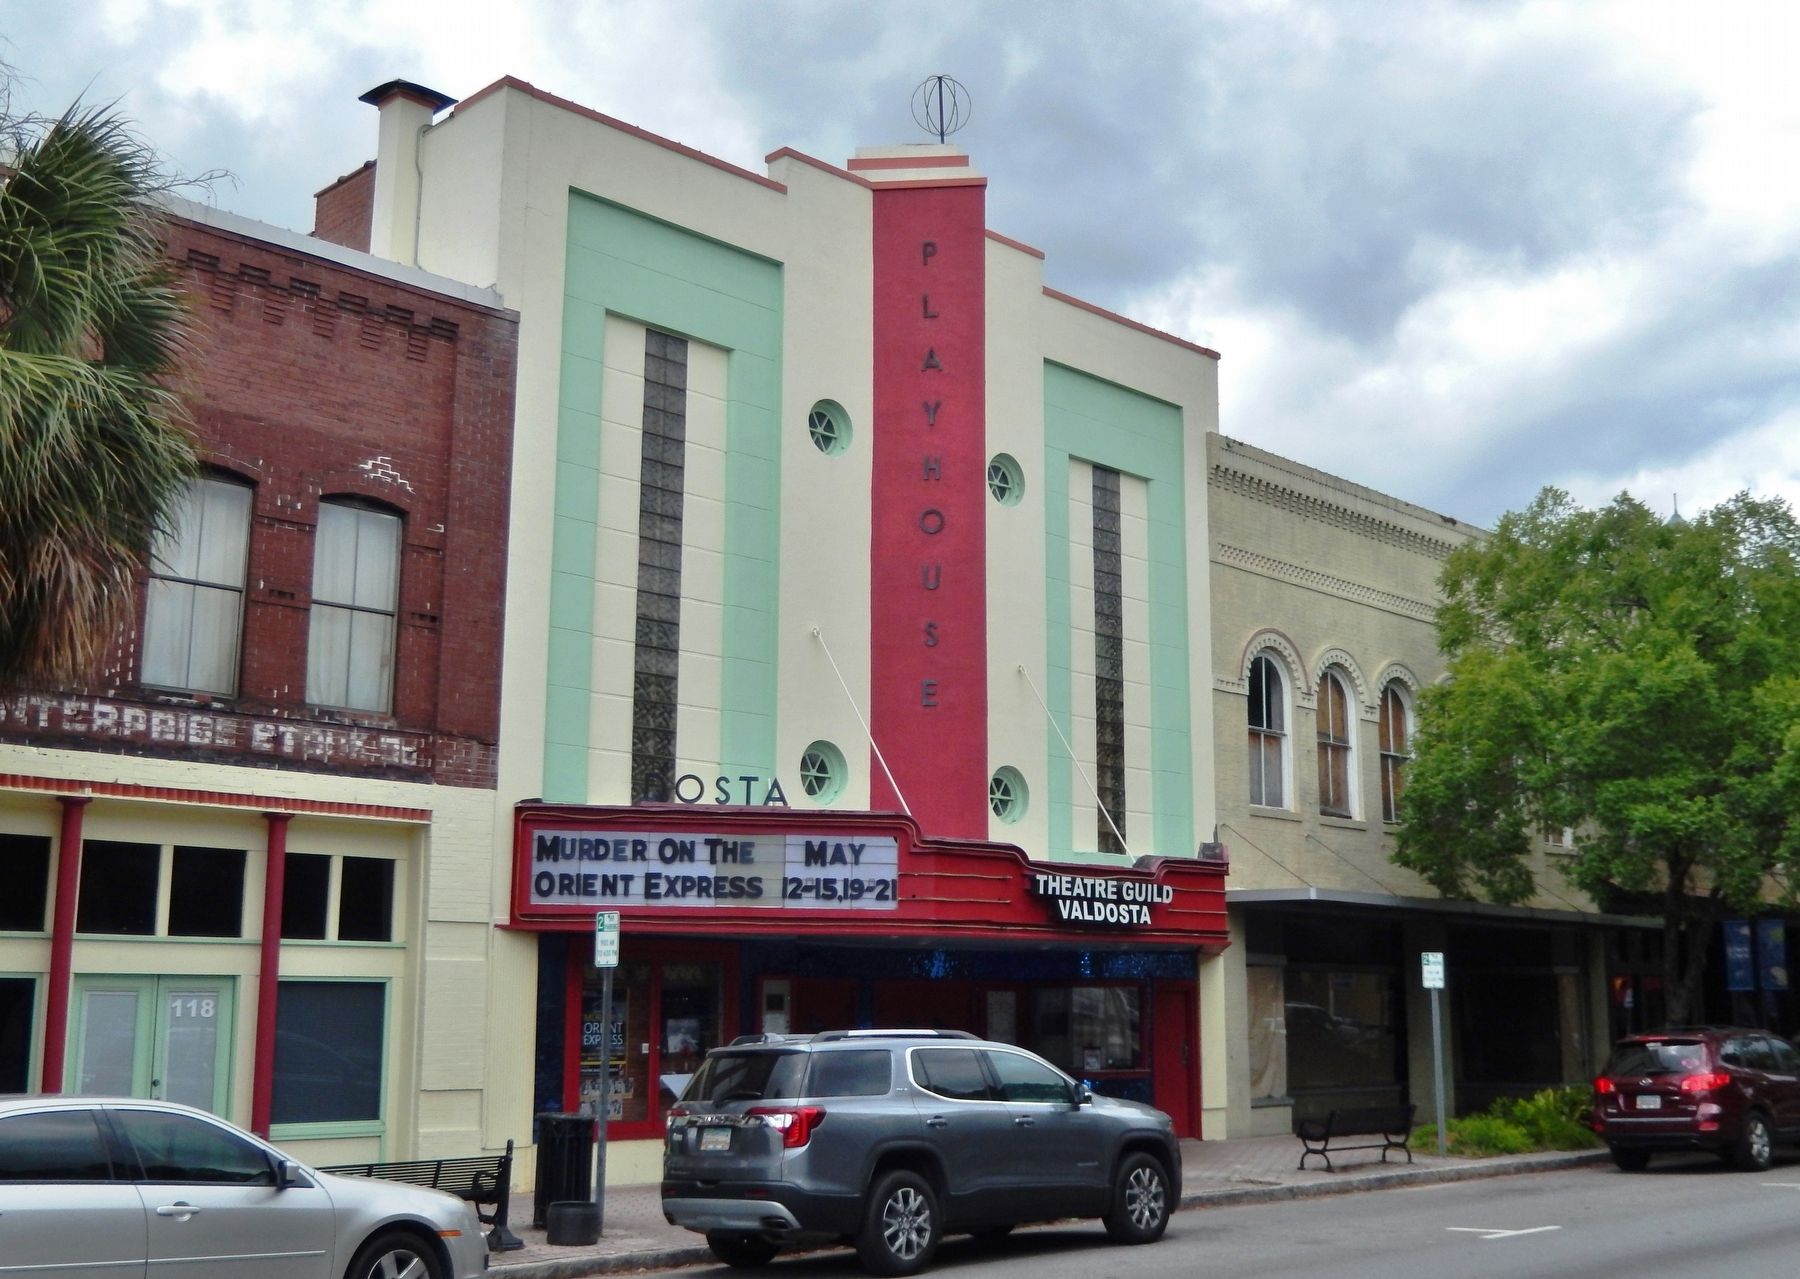 Dosta Theater & Marquee image. Click for full size.